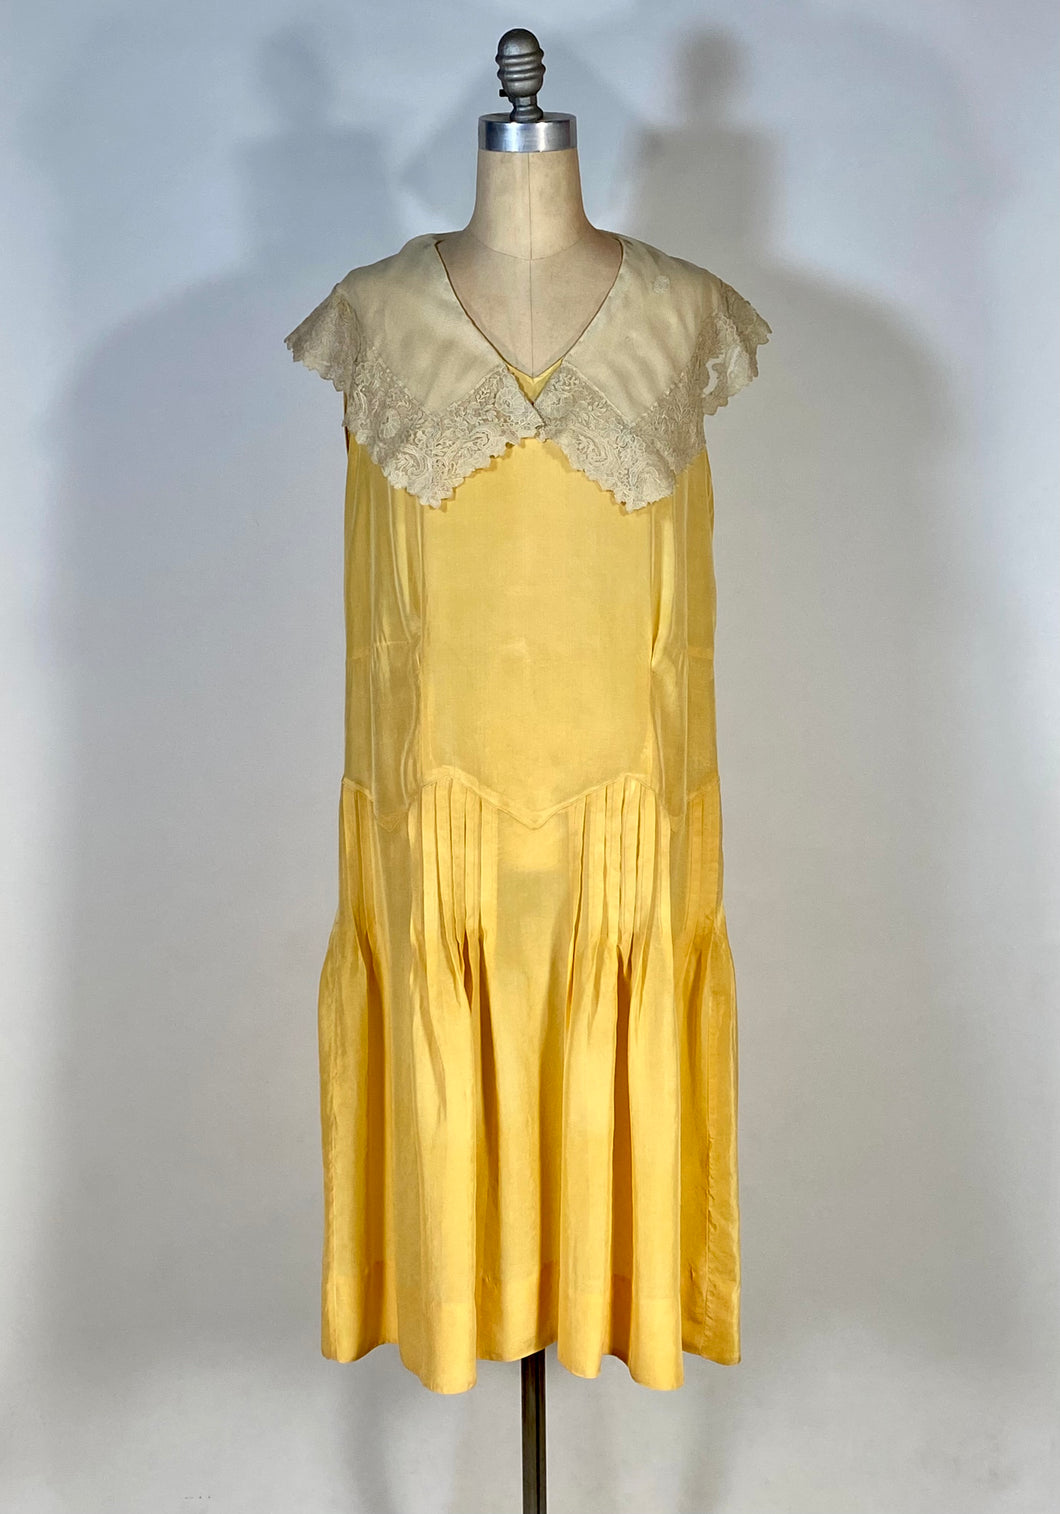 1920’s Buttery yellow silk drop waist Flapper style dress with antique lace collar